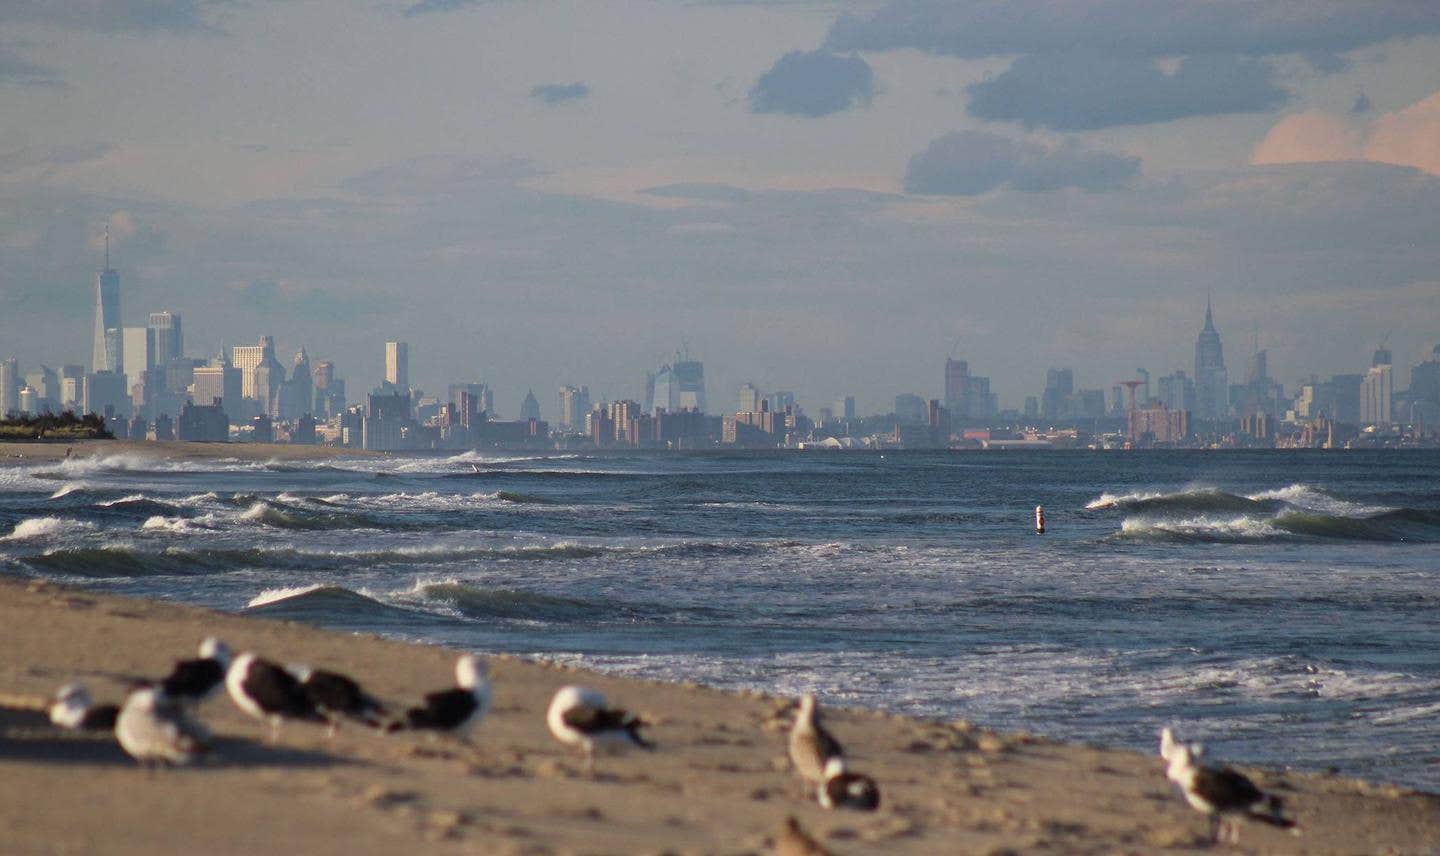 The view of New York City from the beach at Sandy Hook



The New York City skyline from the beach at Sandy Hook

Credit: NPS Park Ranger Kris Bonello